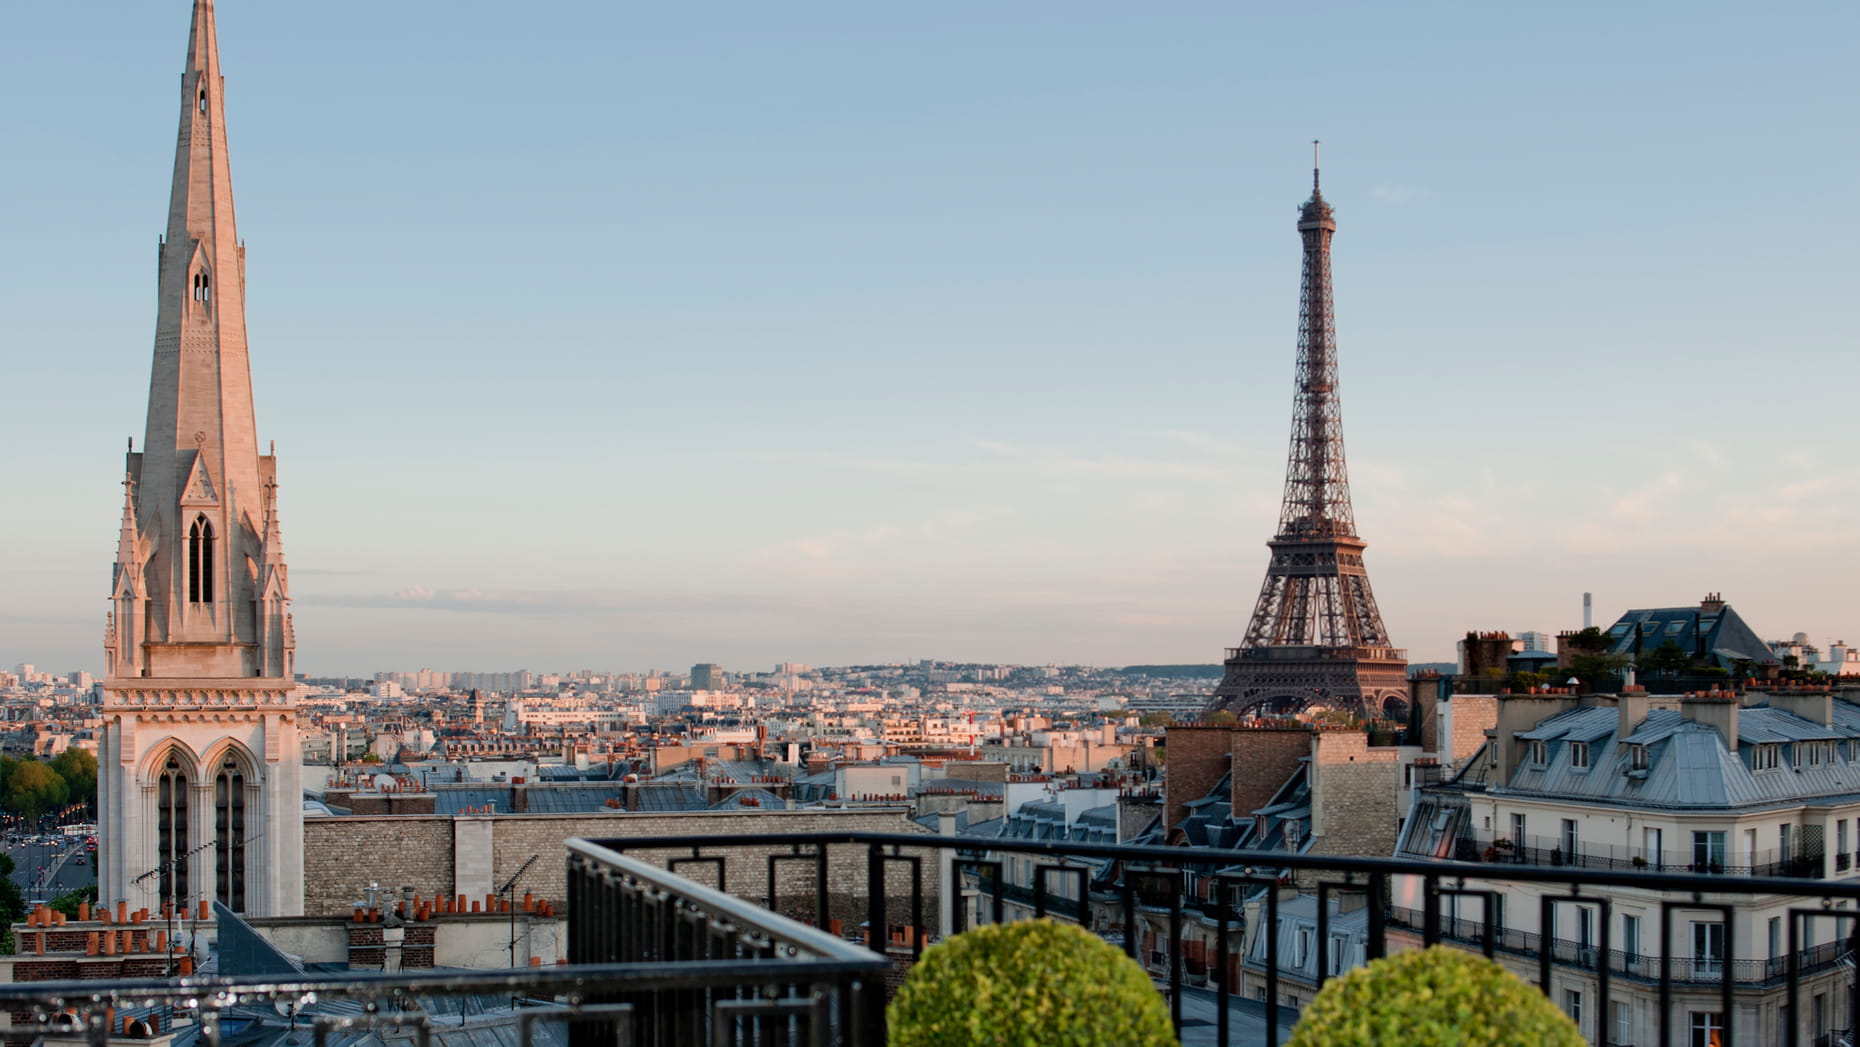 Four Seasons Hotel George V overlooks views of the Eiffel Tower.